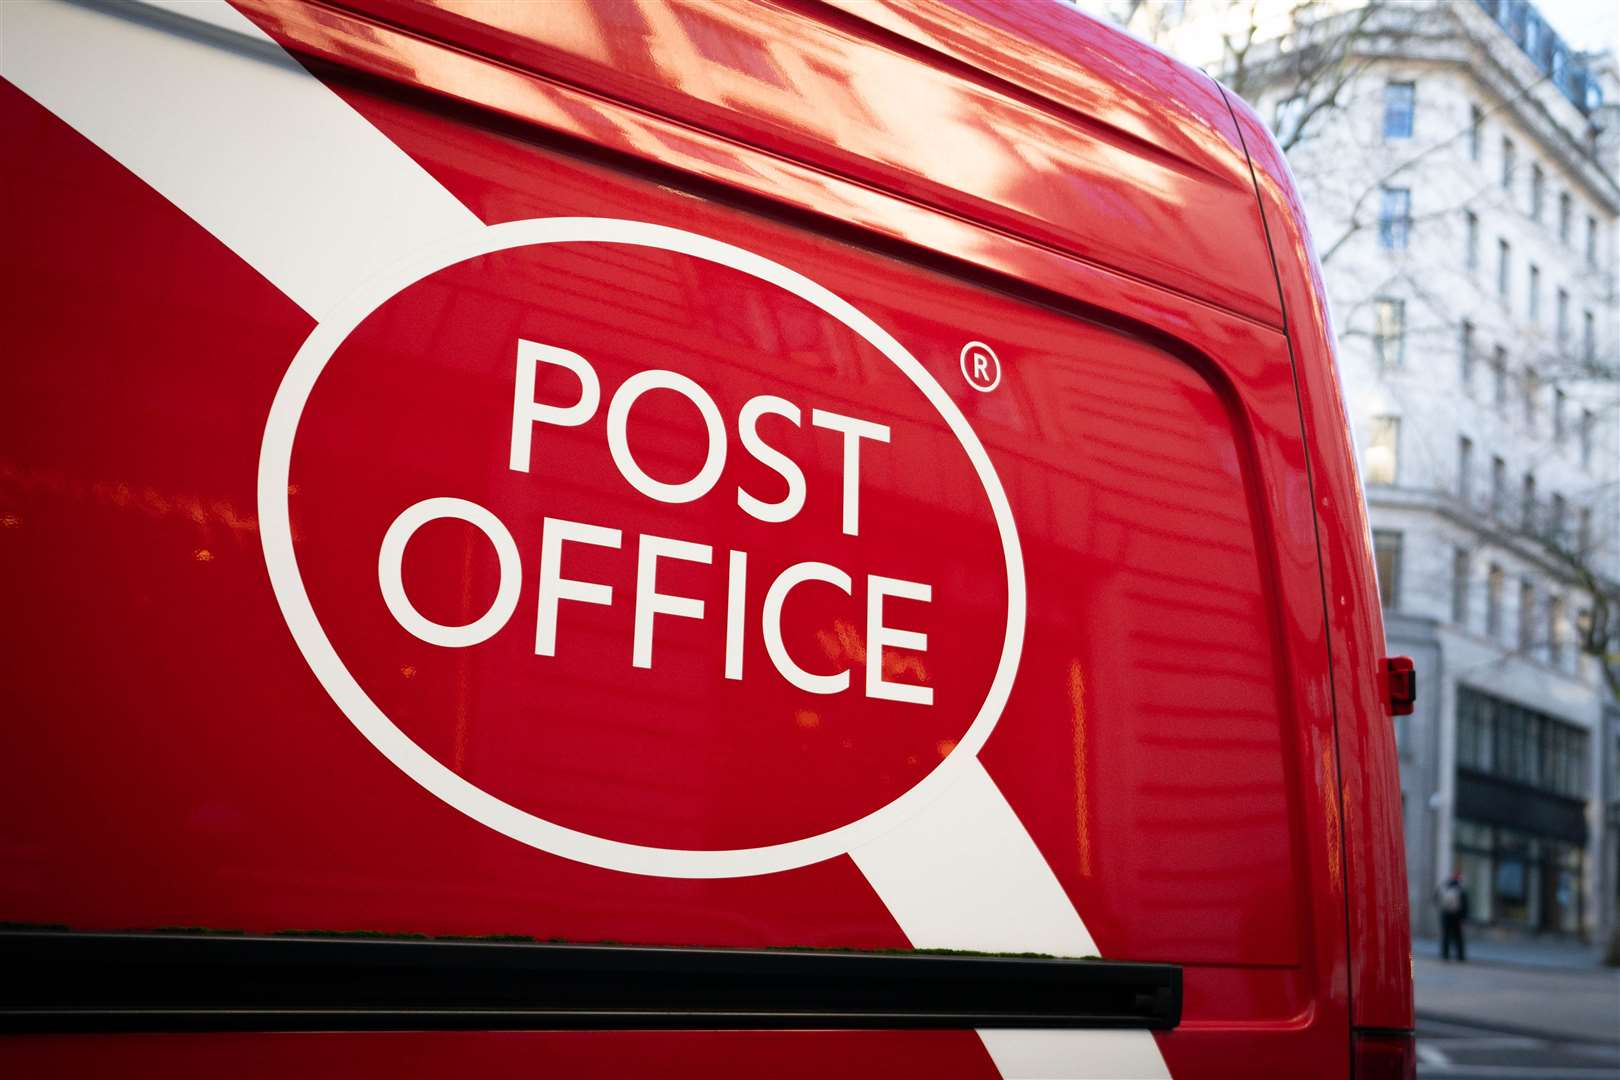 Simon Clarke criticised the culture at the Post Office during his evidence to the inquiry (James Manning/PA)